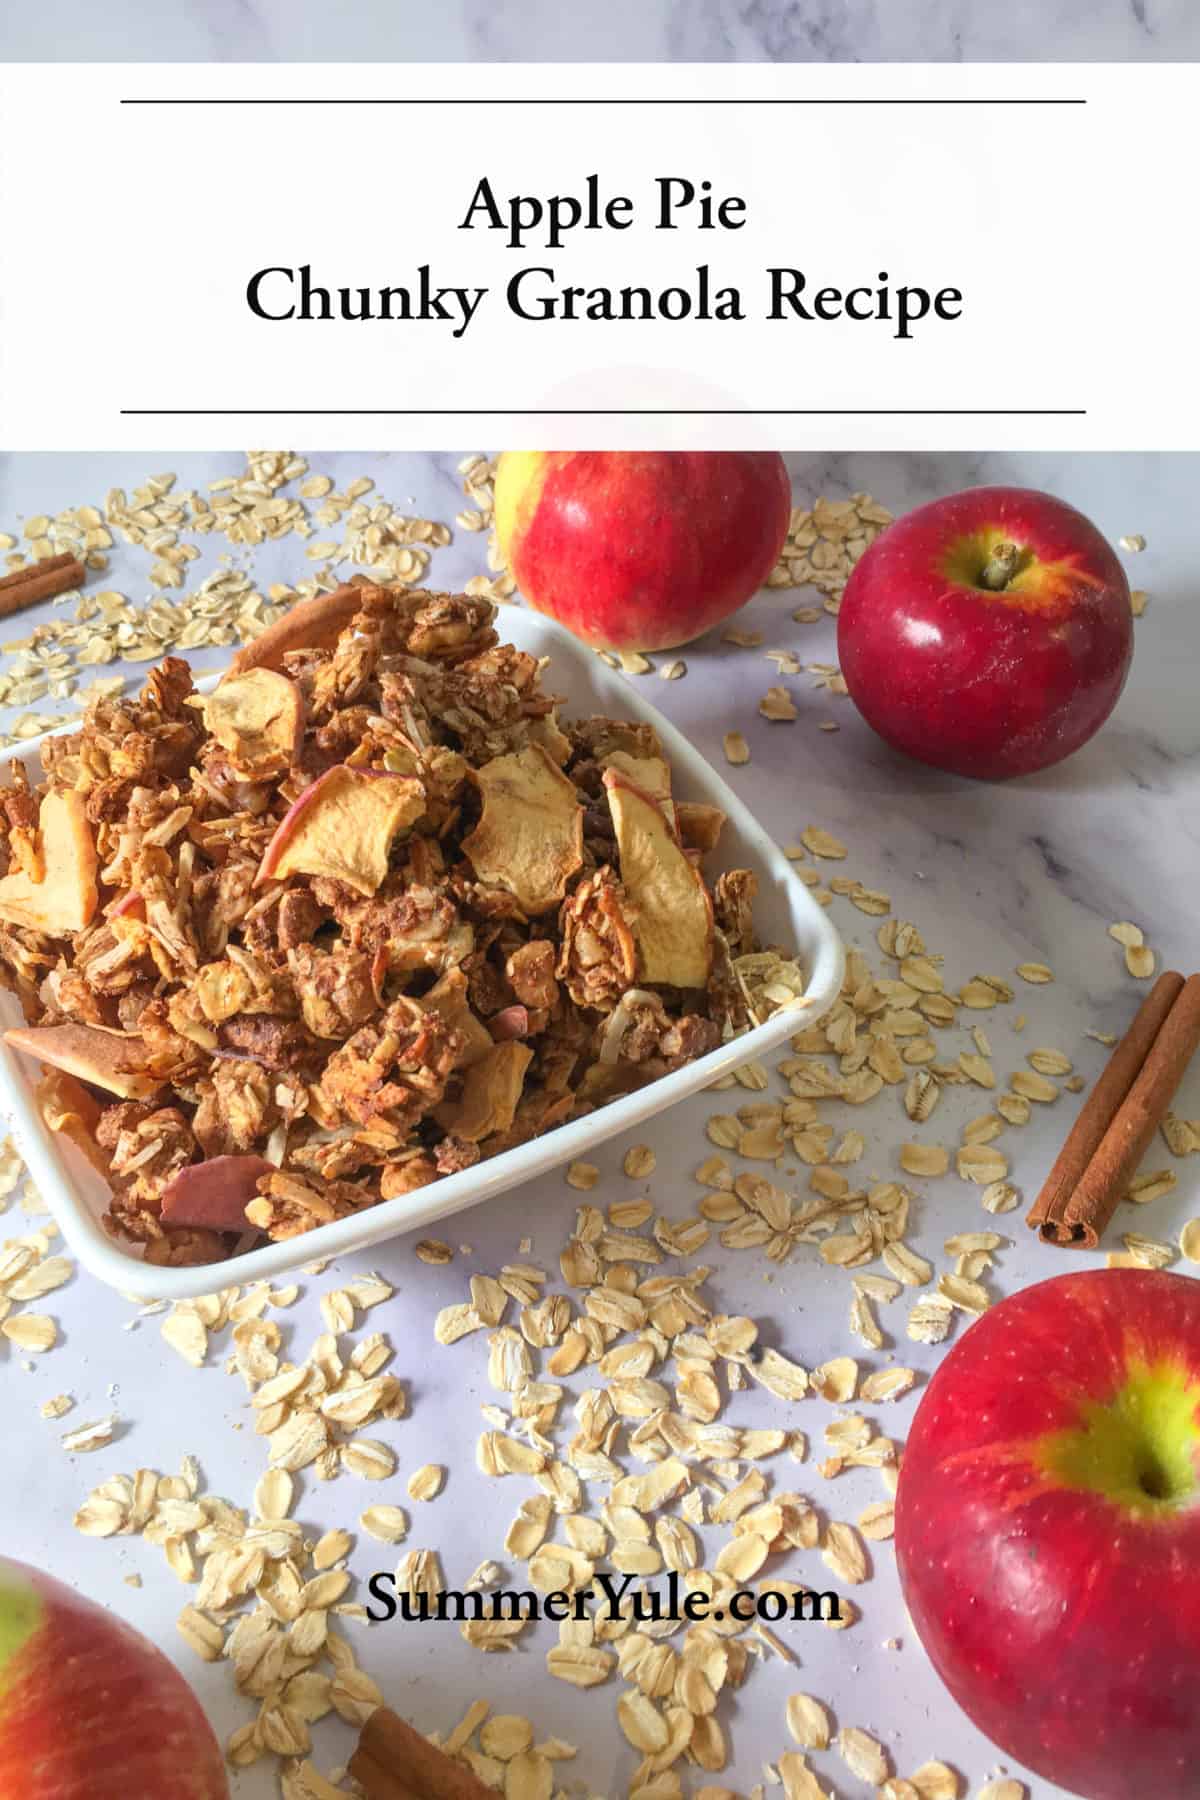 Bowl of the apple pie chunky granola recipe surrounded by apples, rolled oats, and cinnamon sticks